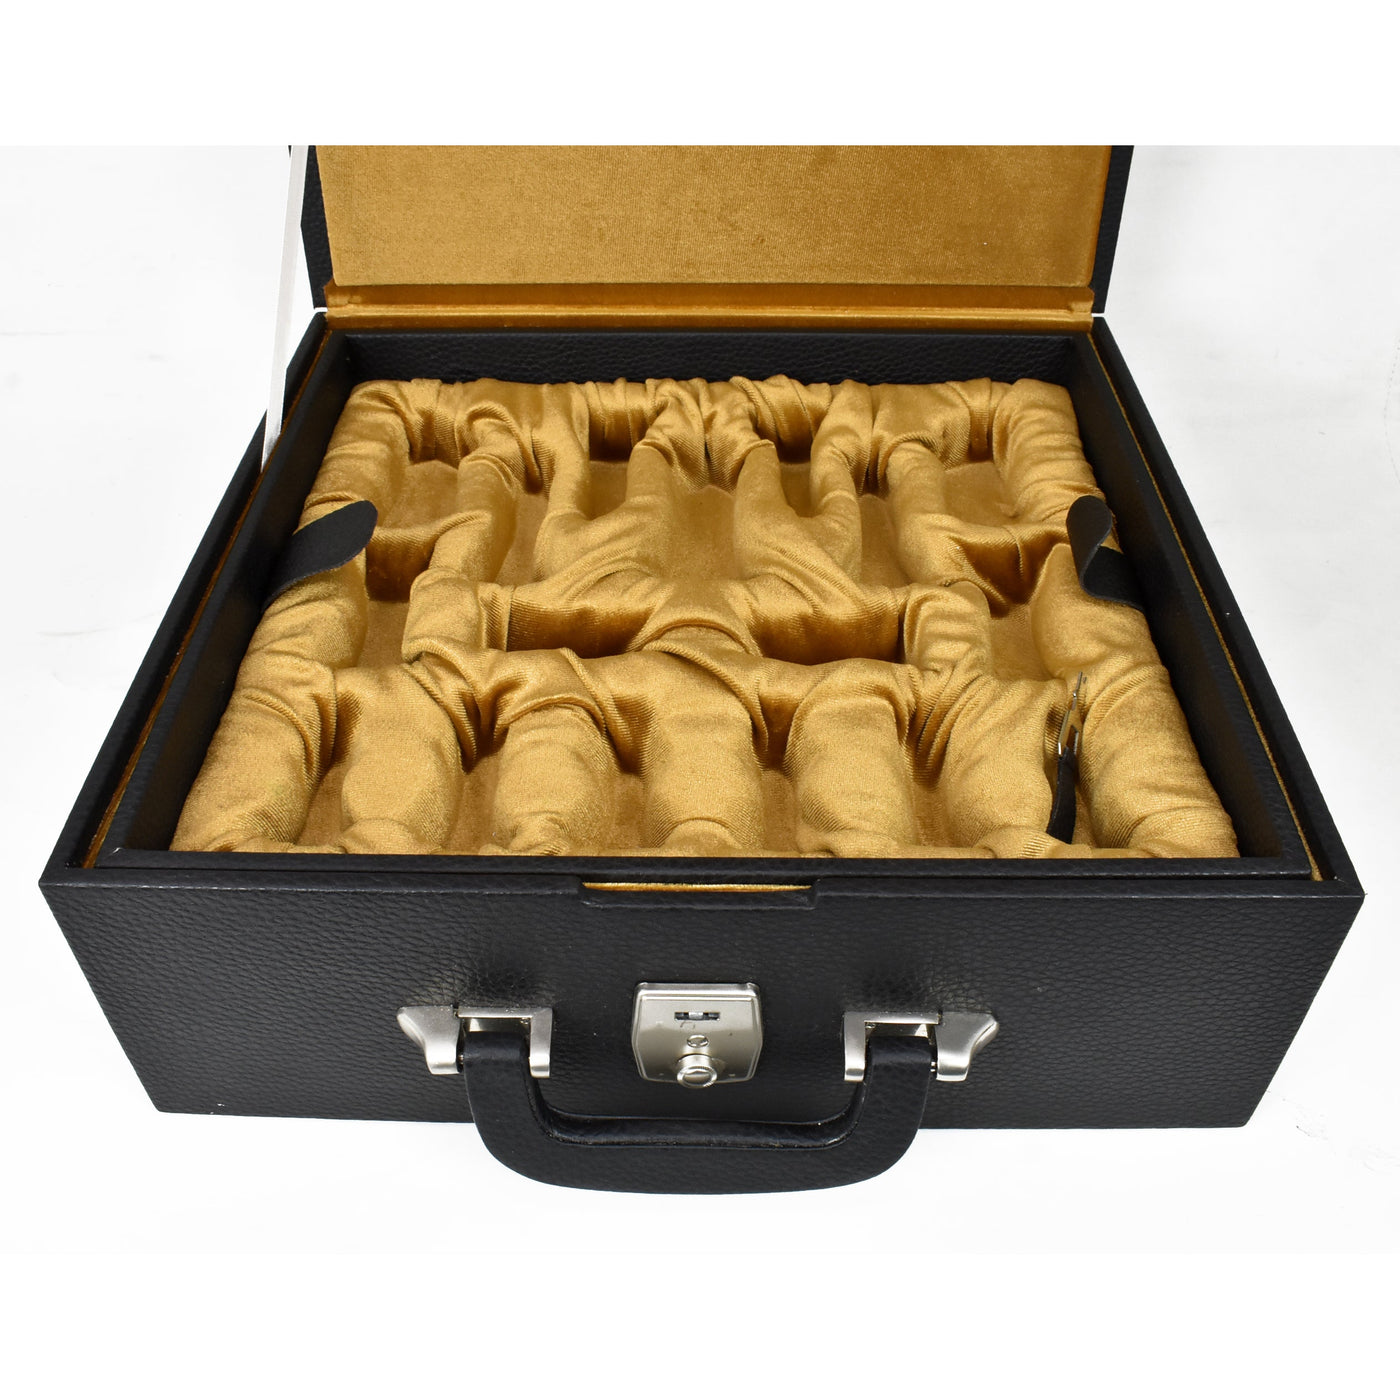 3.9" Craftsman Series Staunton Golden Rosewood Chess Pieces With 21" Drueke Style Golden Rosewood & Maple Wood Chess board and Leatherette Coffer Storage Box